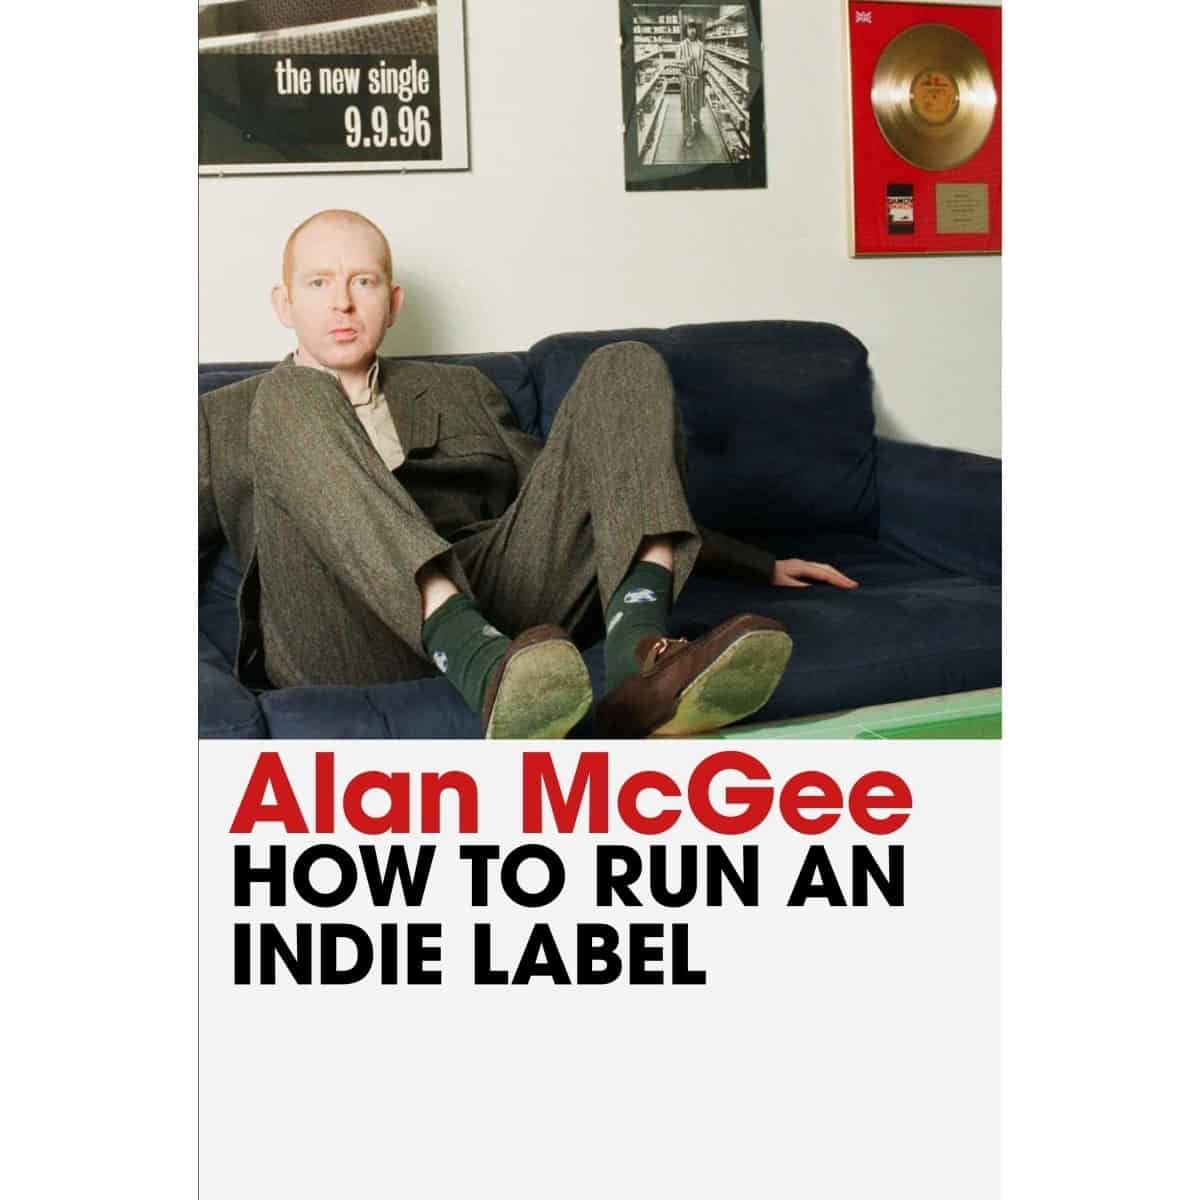 Alan McGee - How To Run An Indie Label: Signed Book